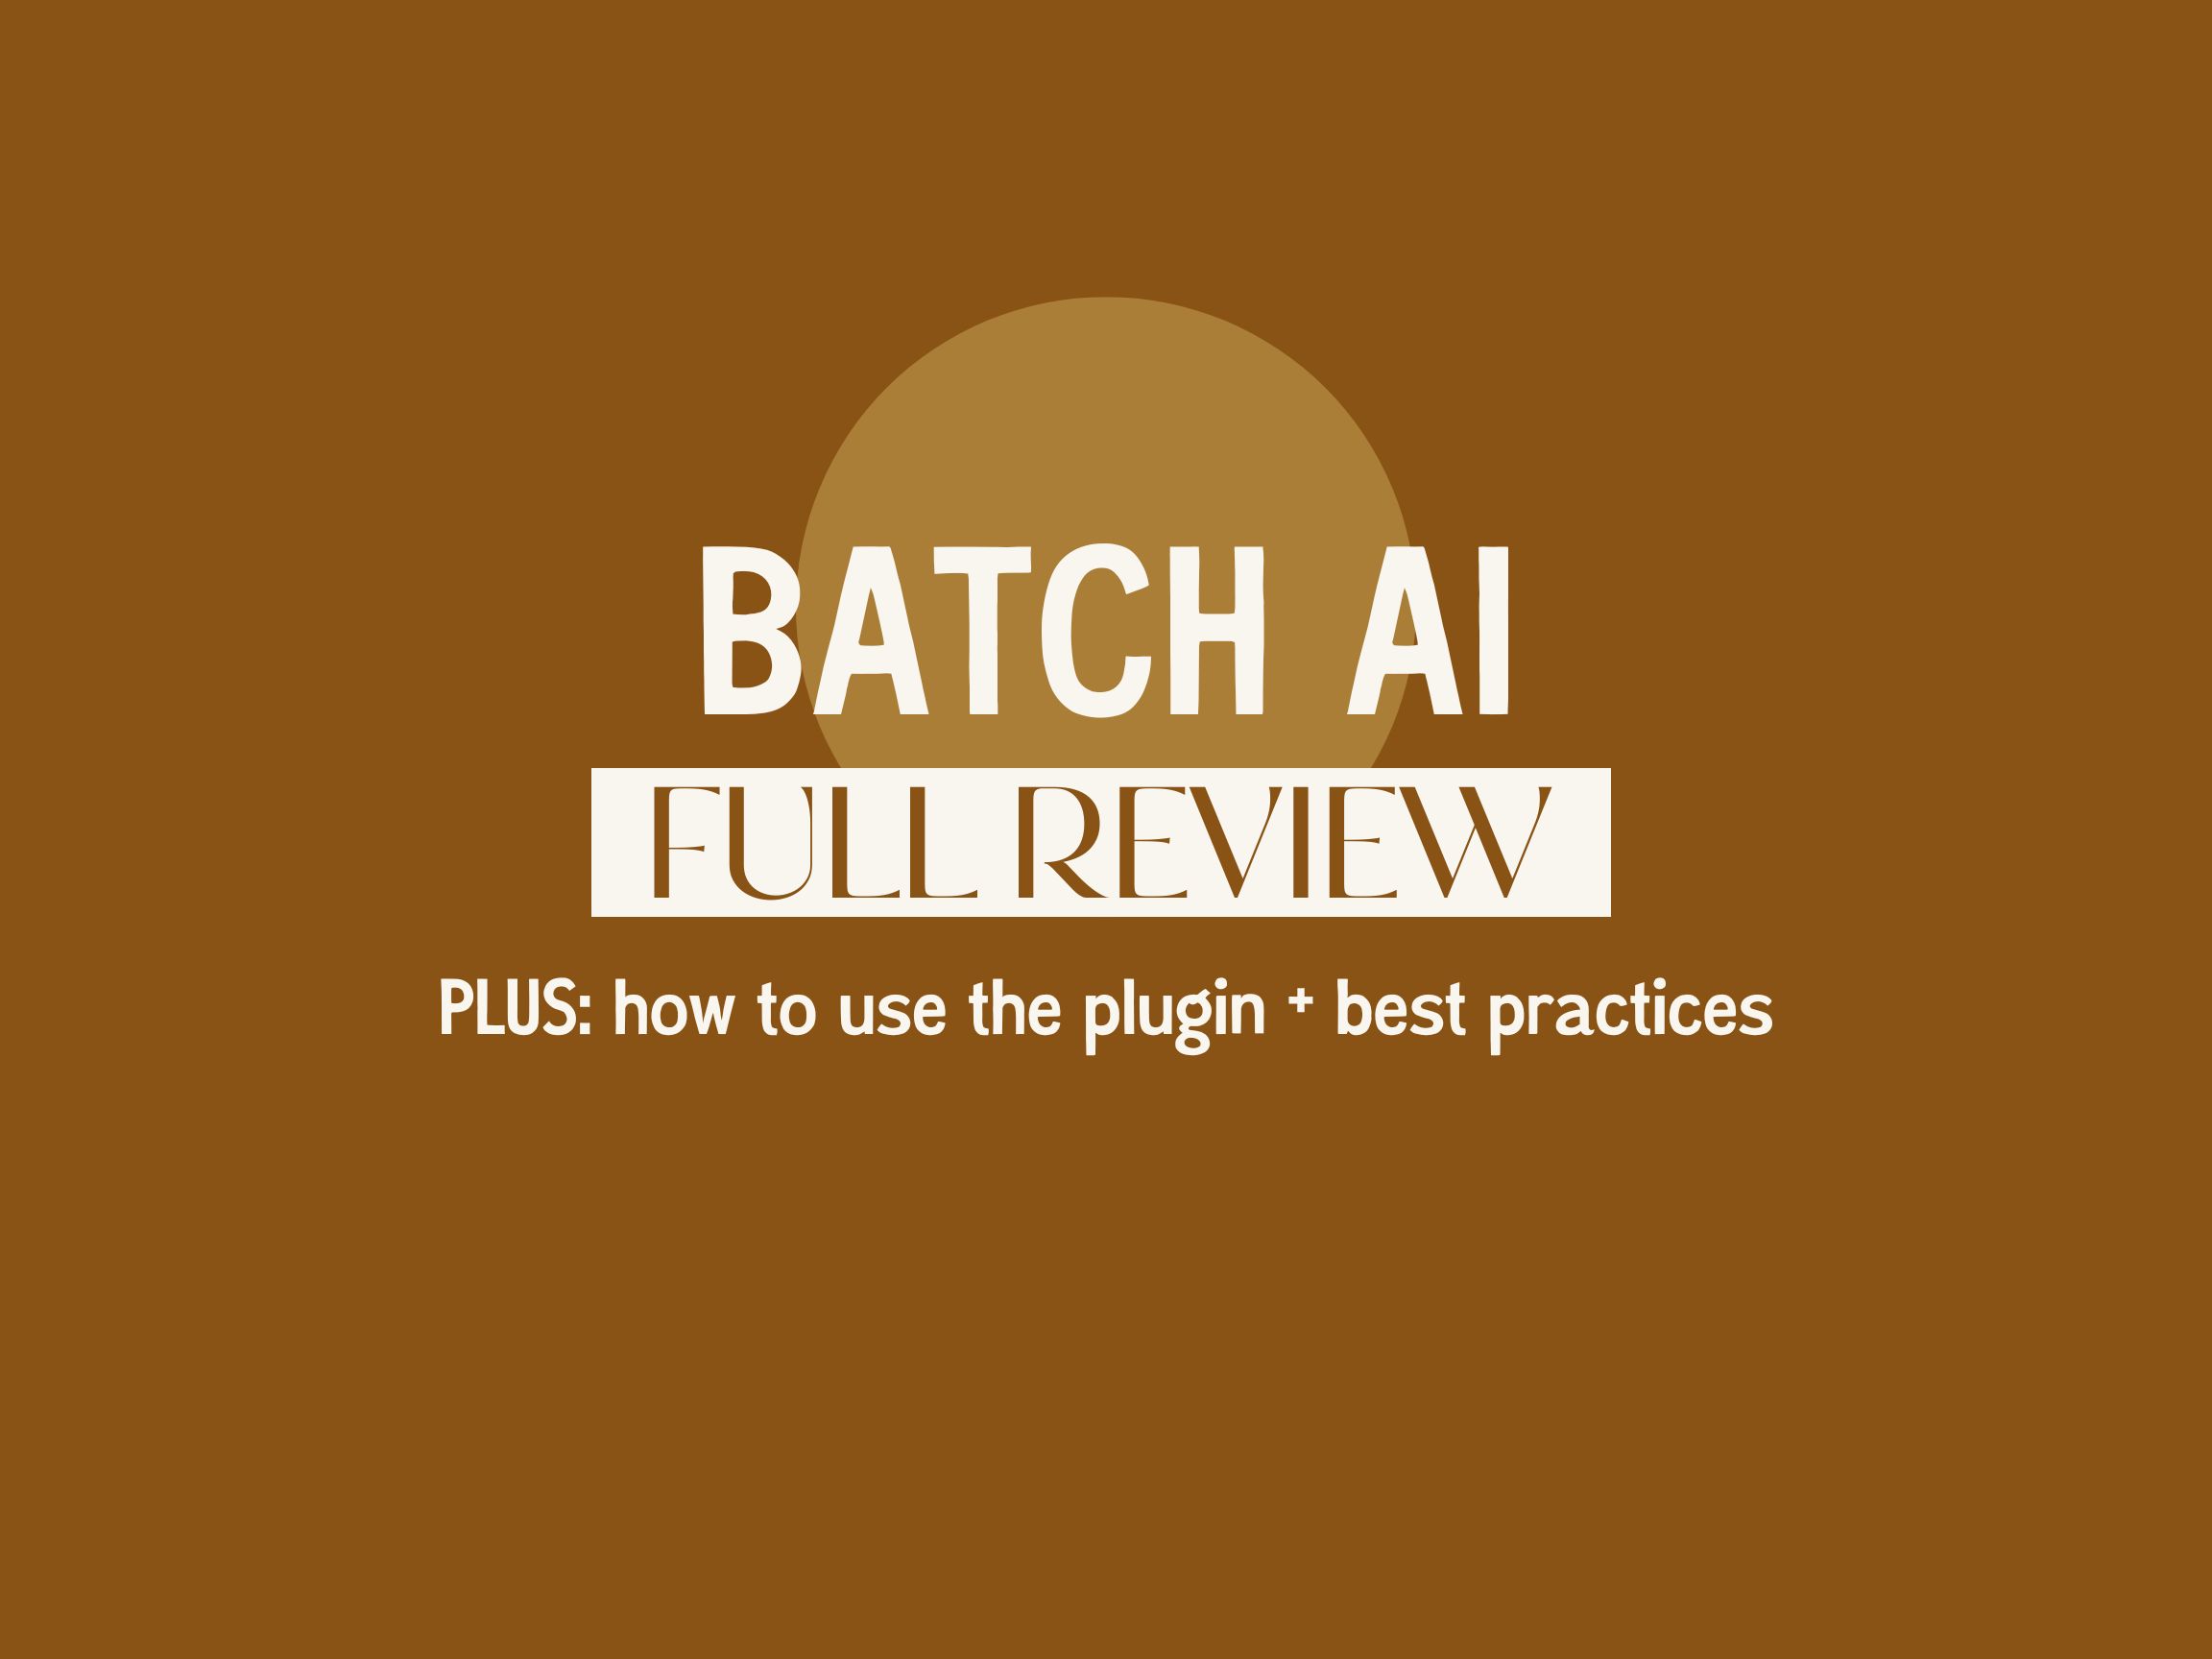 Batch AI full review and best practices on how to use the plugin